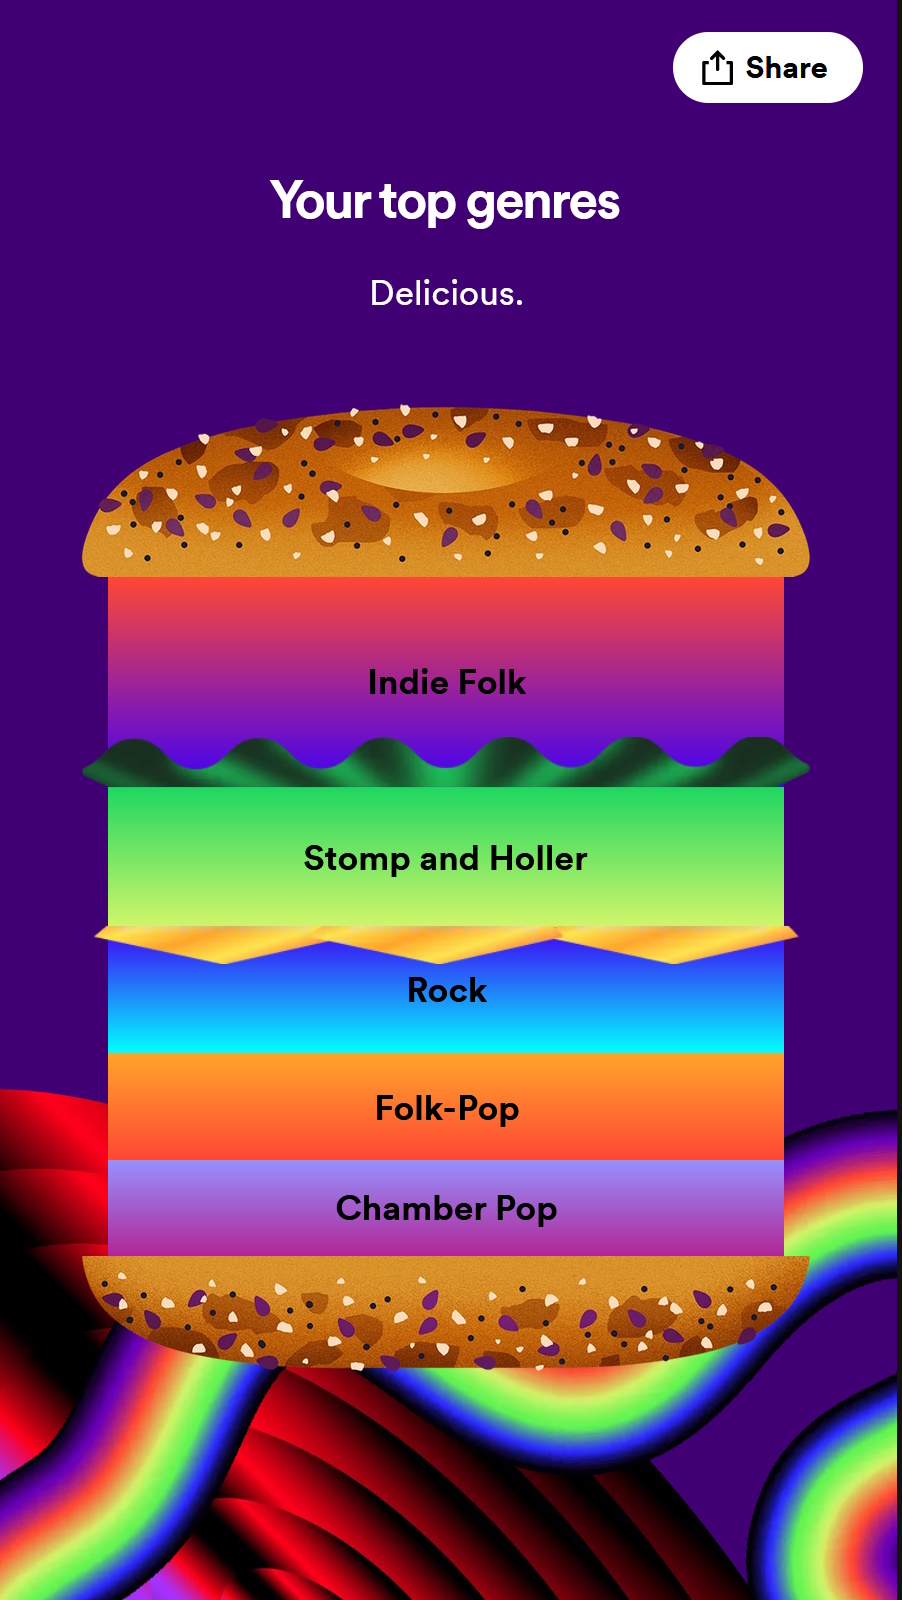 Hamburger chart of genres including Indy Folk, Stomp and Holler, Rock, Folk Pop and CHamber Pop.